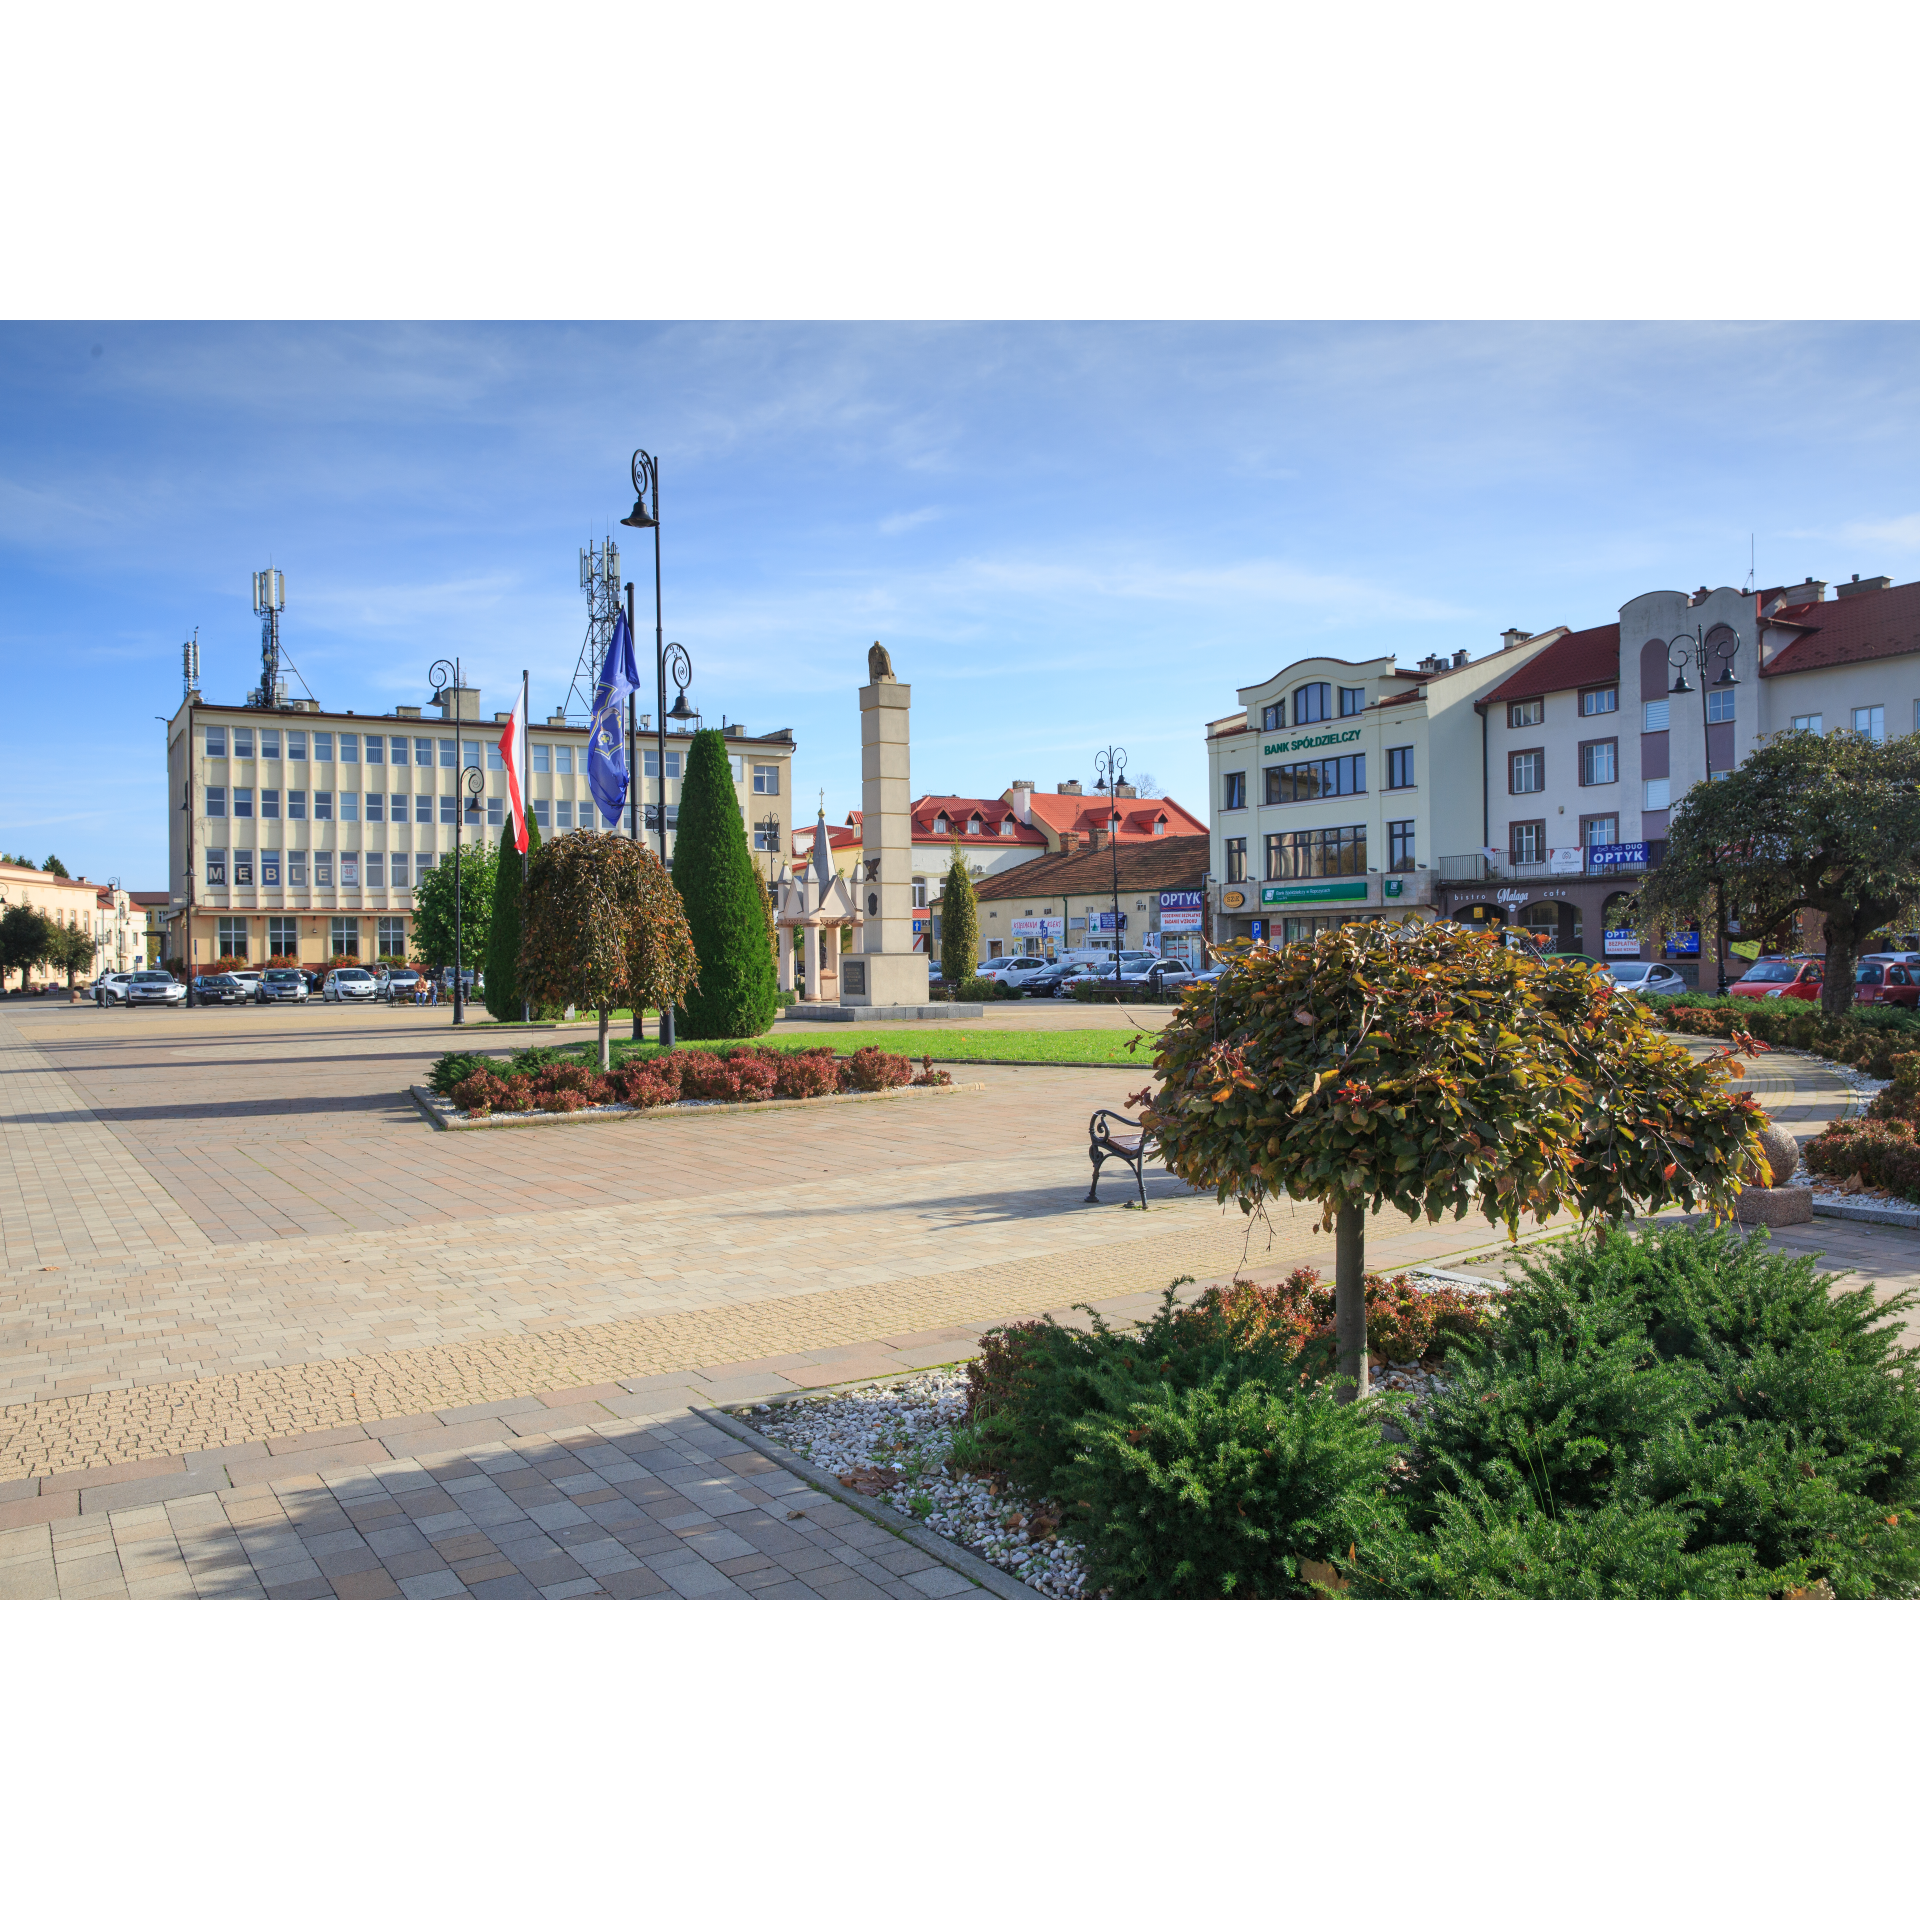 Market square in Ropczyce